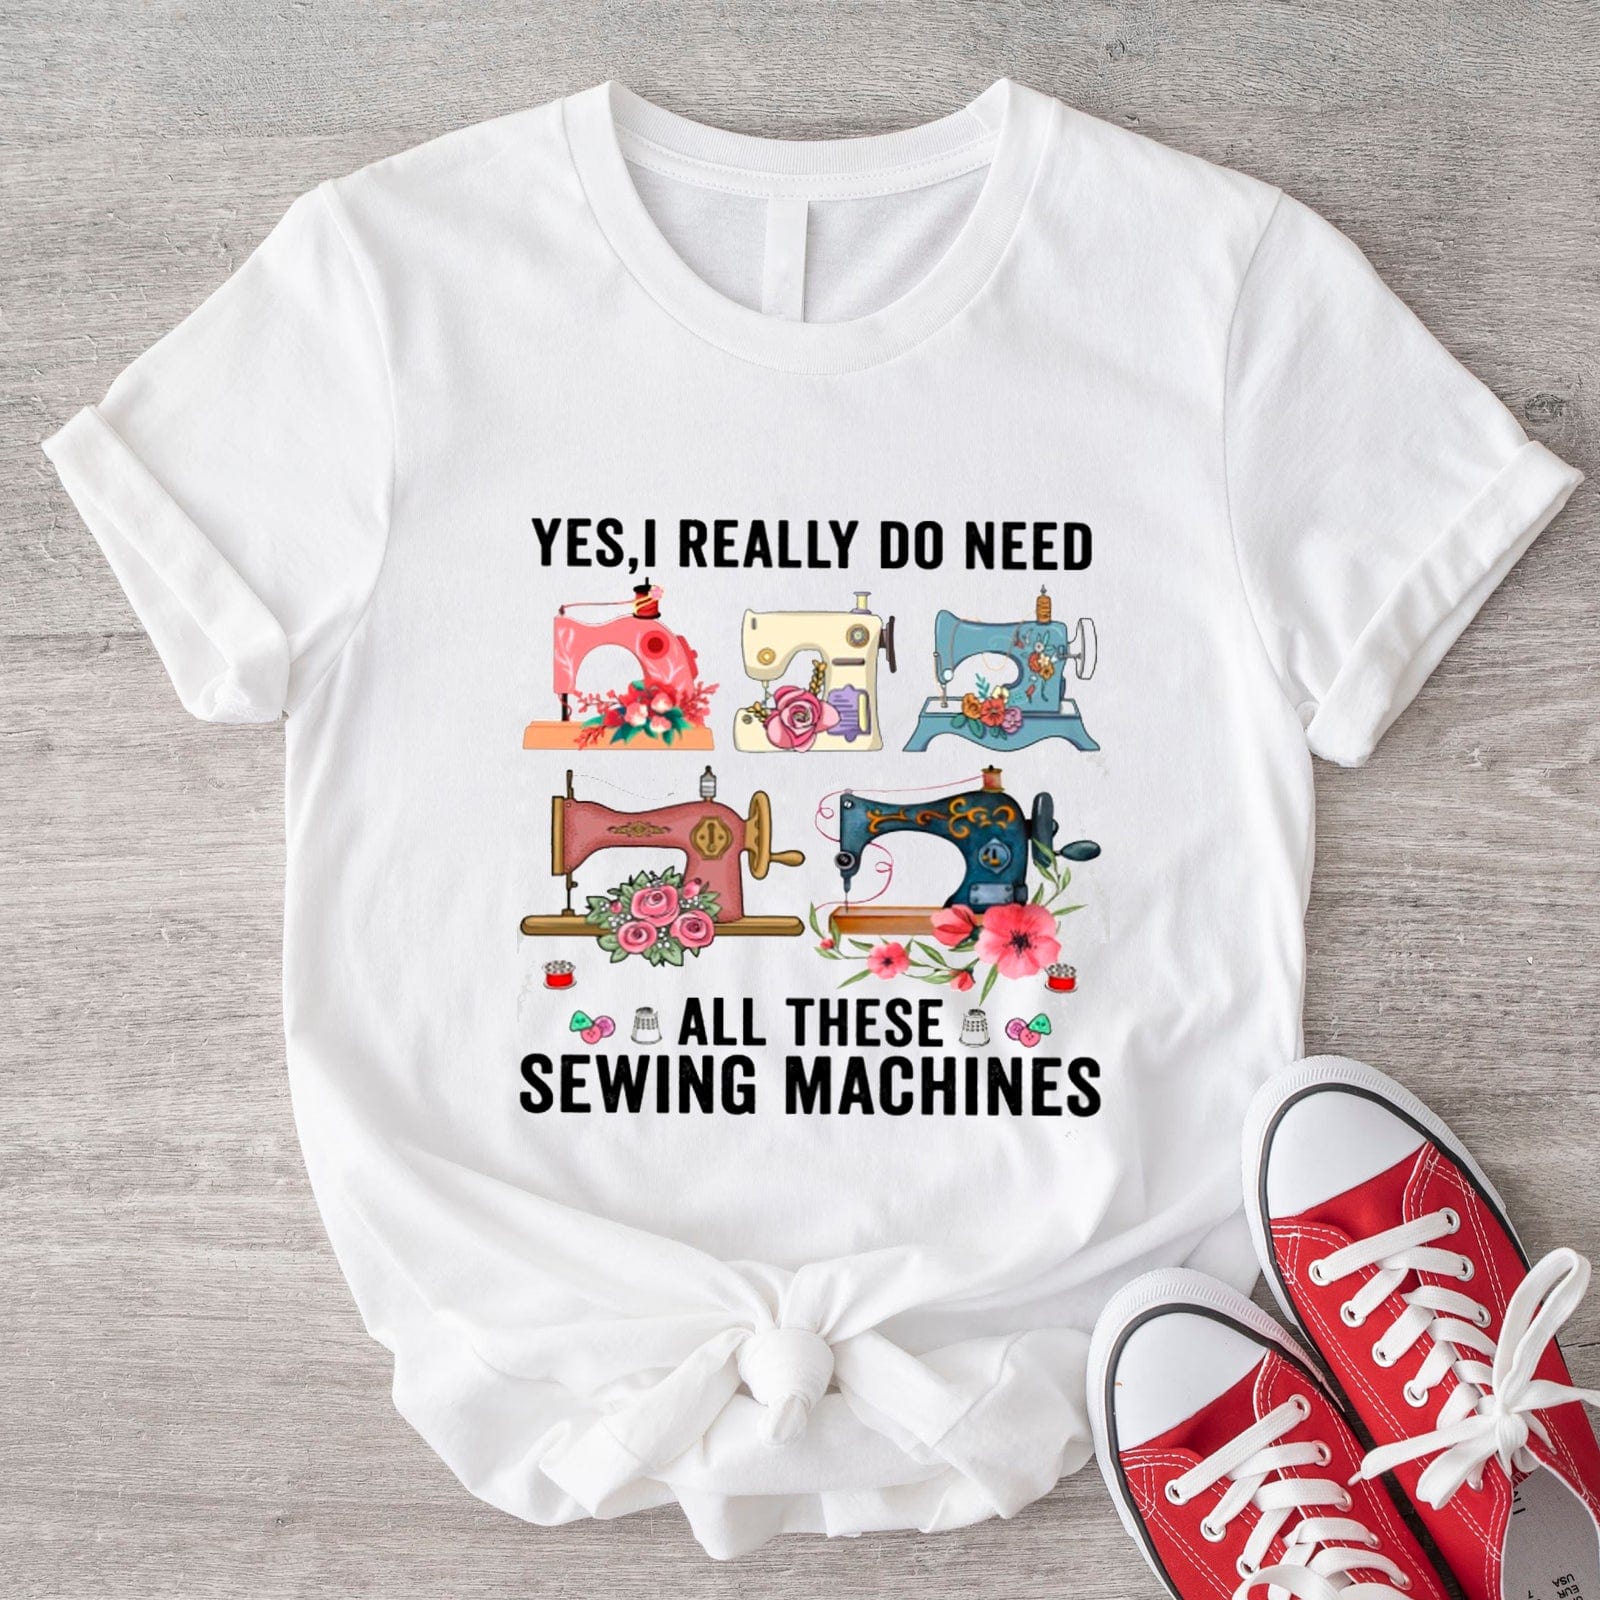 Yes, I Really Do Need All These Sewing Machines Shirt